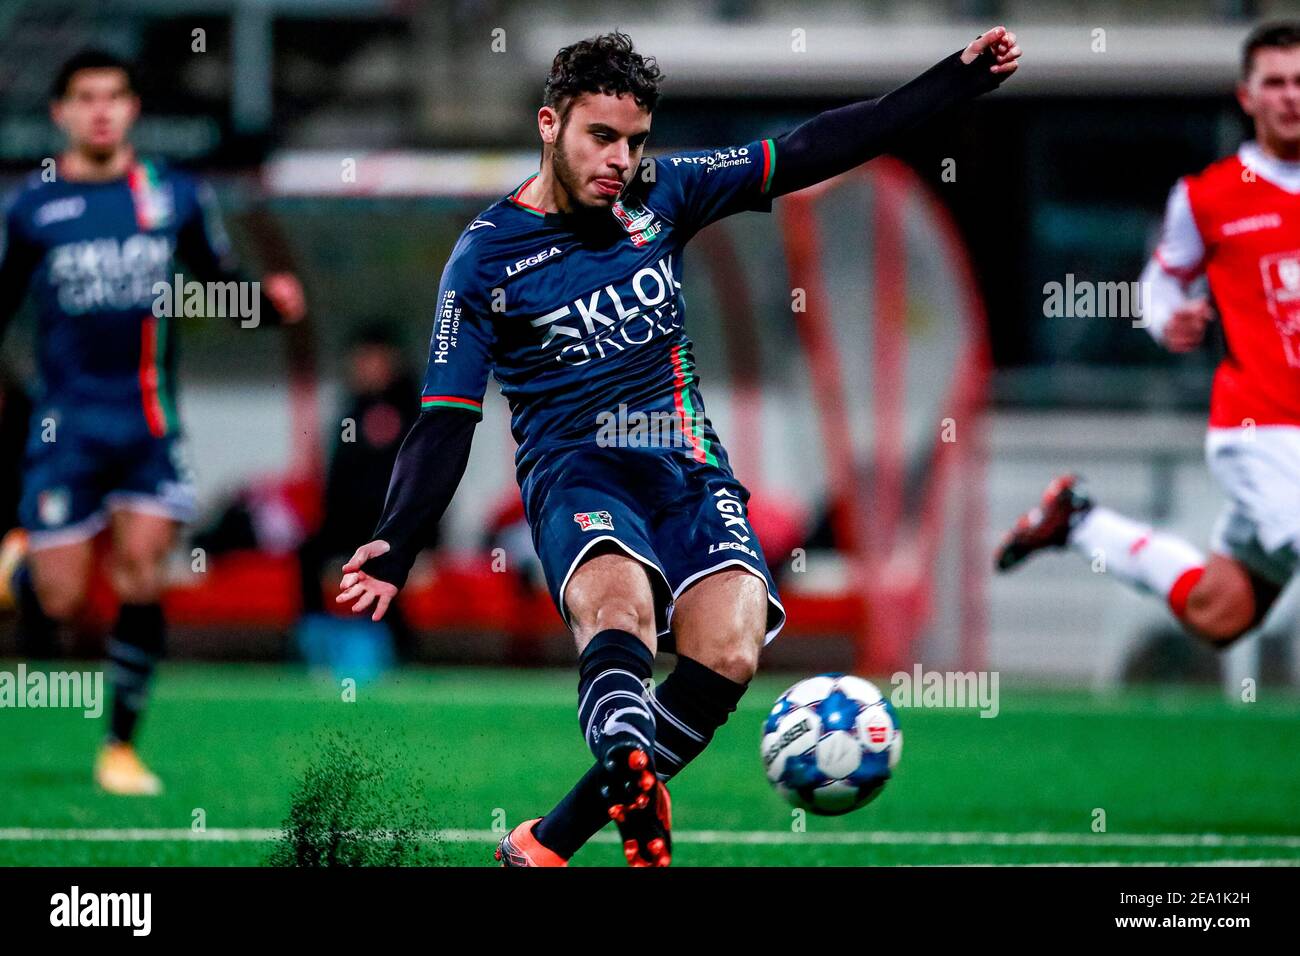 MAASTRICHT, NETHERLANDS - FEBRUARY 6: Ayman Sellouf of NEC scoring a goal (2:1) during the Dutch Keukenkampioendivisie match between MVV and NEC at De Stock Photo